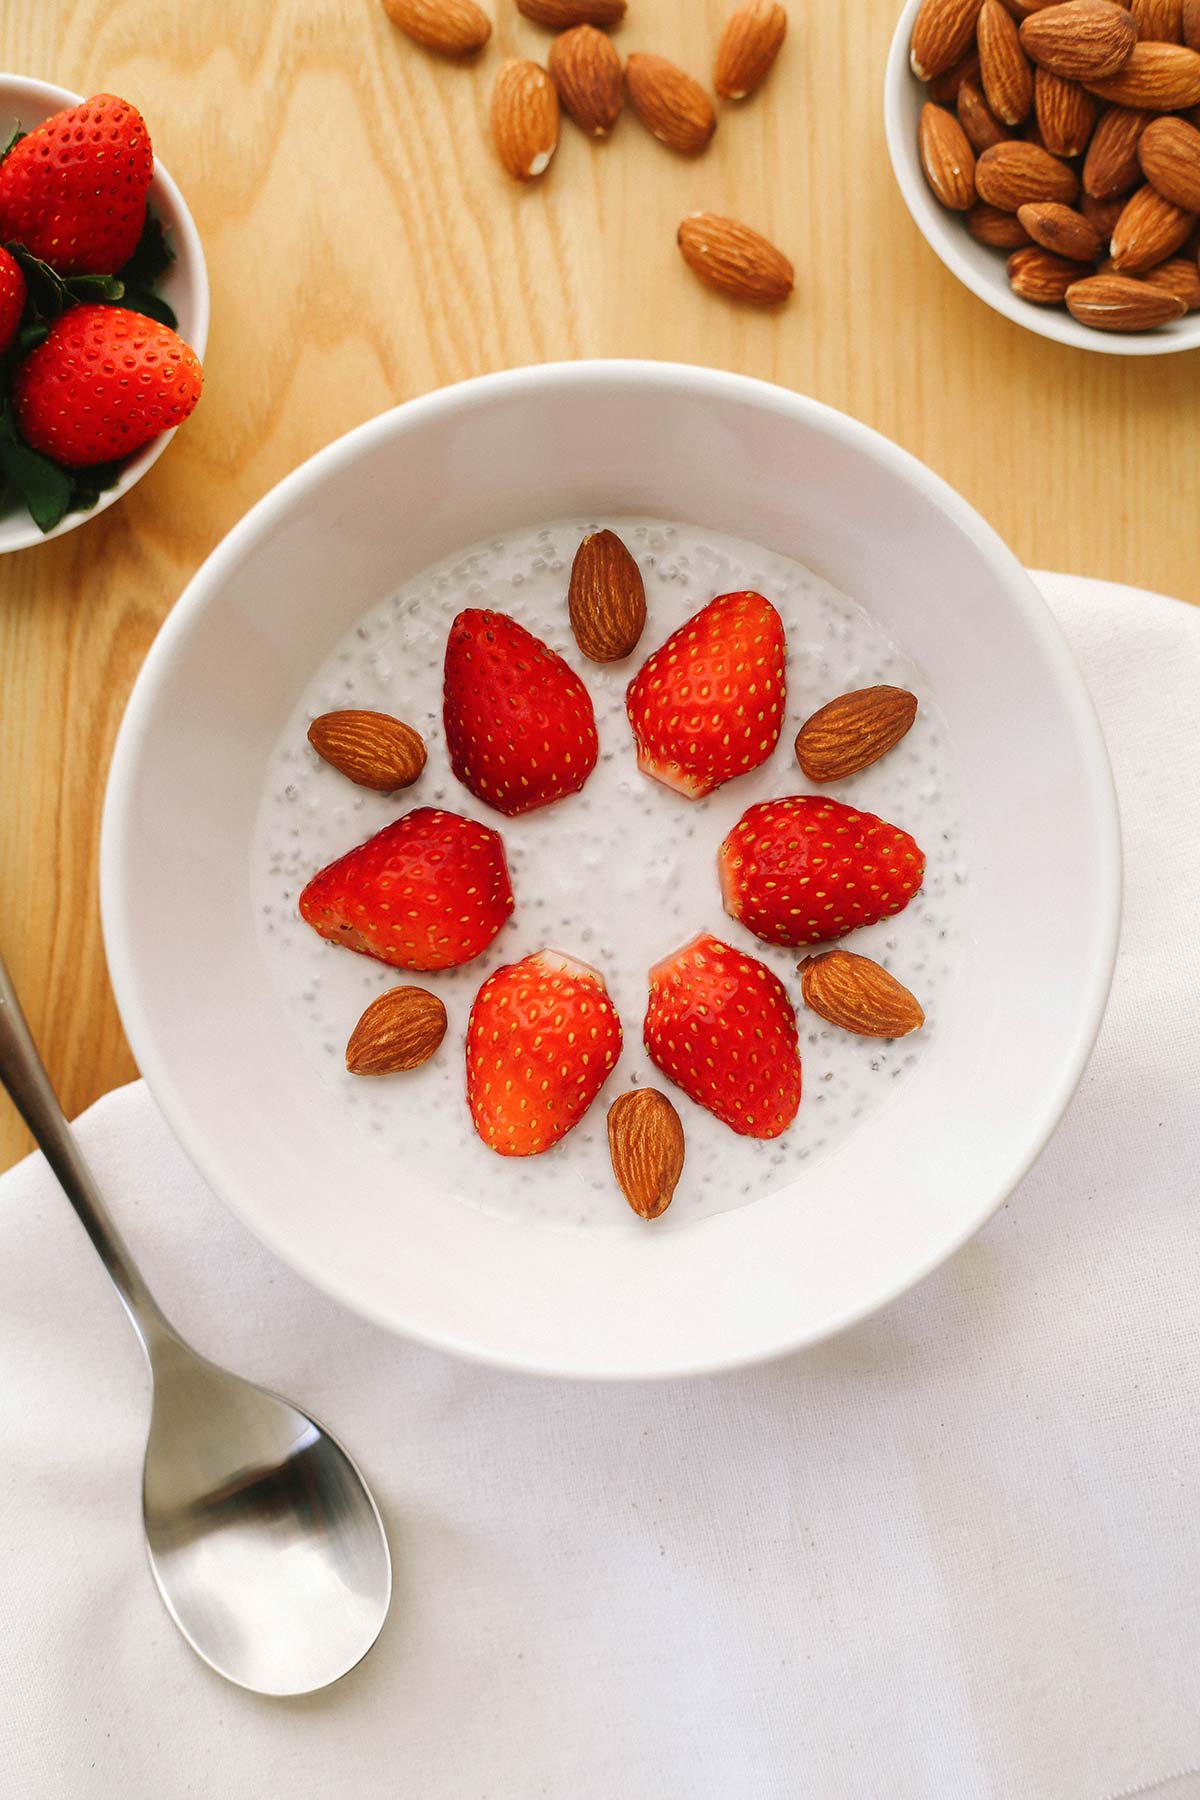 Chia pudding for keto and low carb. Easy overnight recipe with strawberries and almonds.